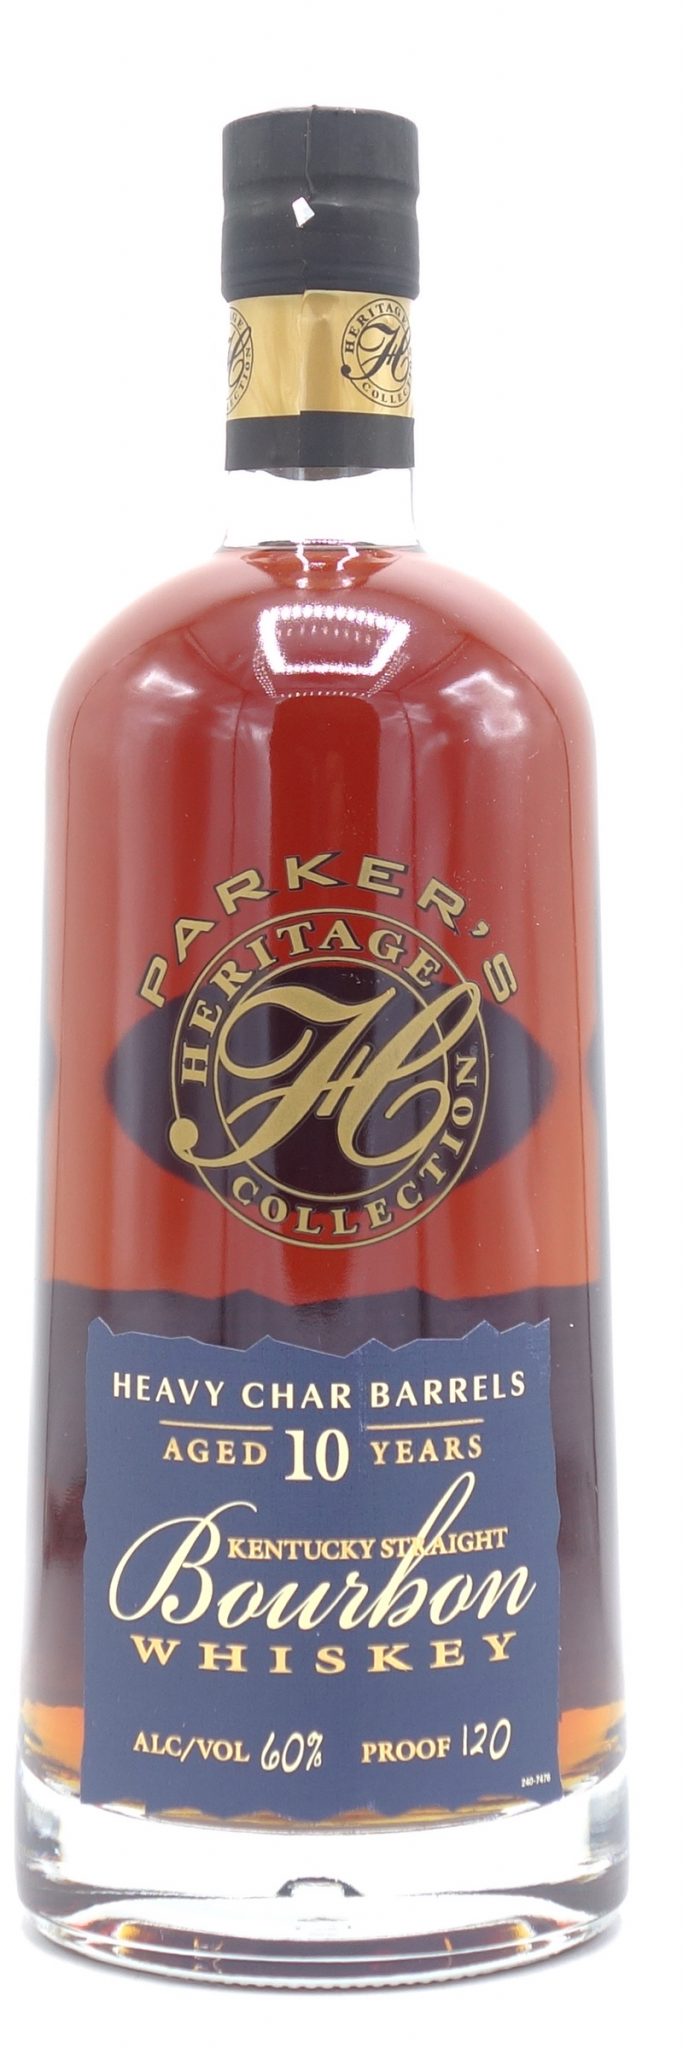 Parker's Heritage Kentucky Straight Bourbon Whiskey 10 Year Old, Heavy Char Barrels, 120.0 Proof 750ml